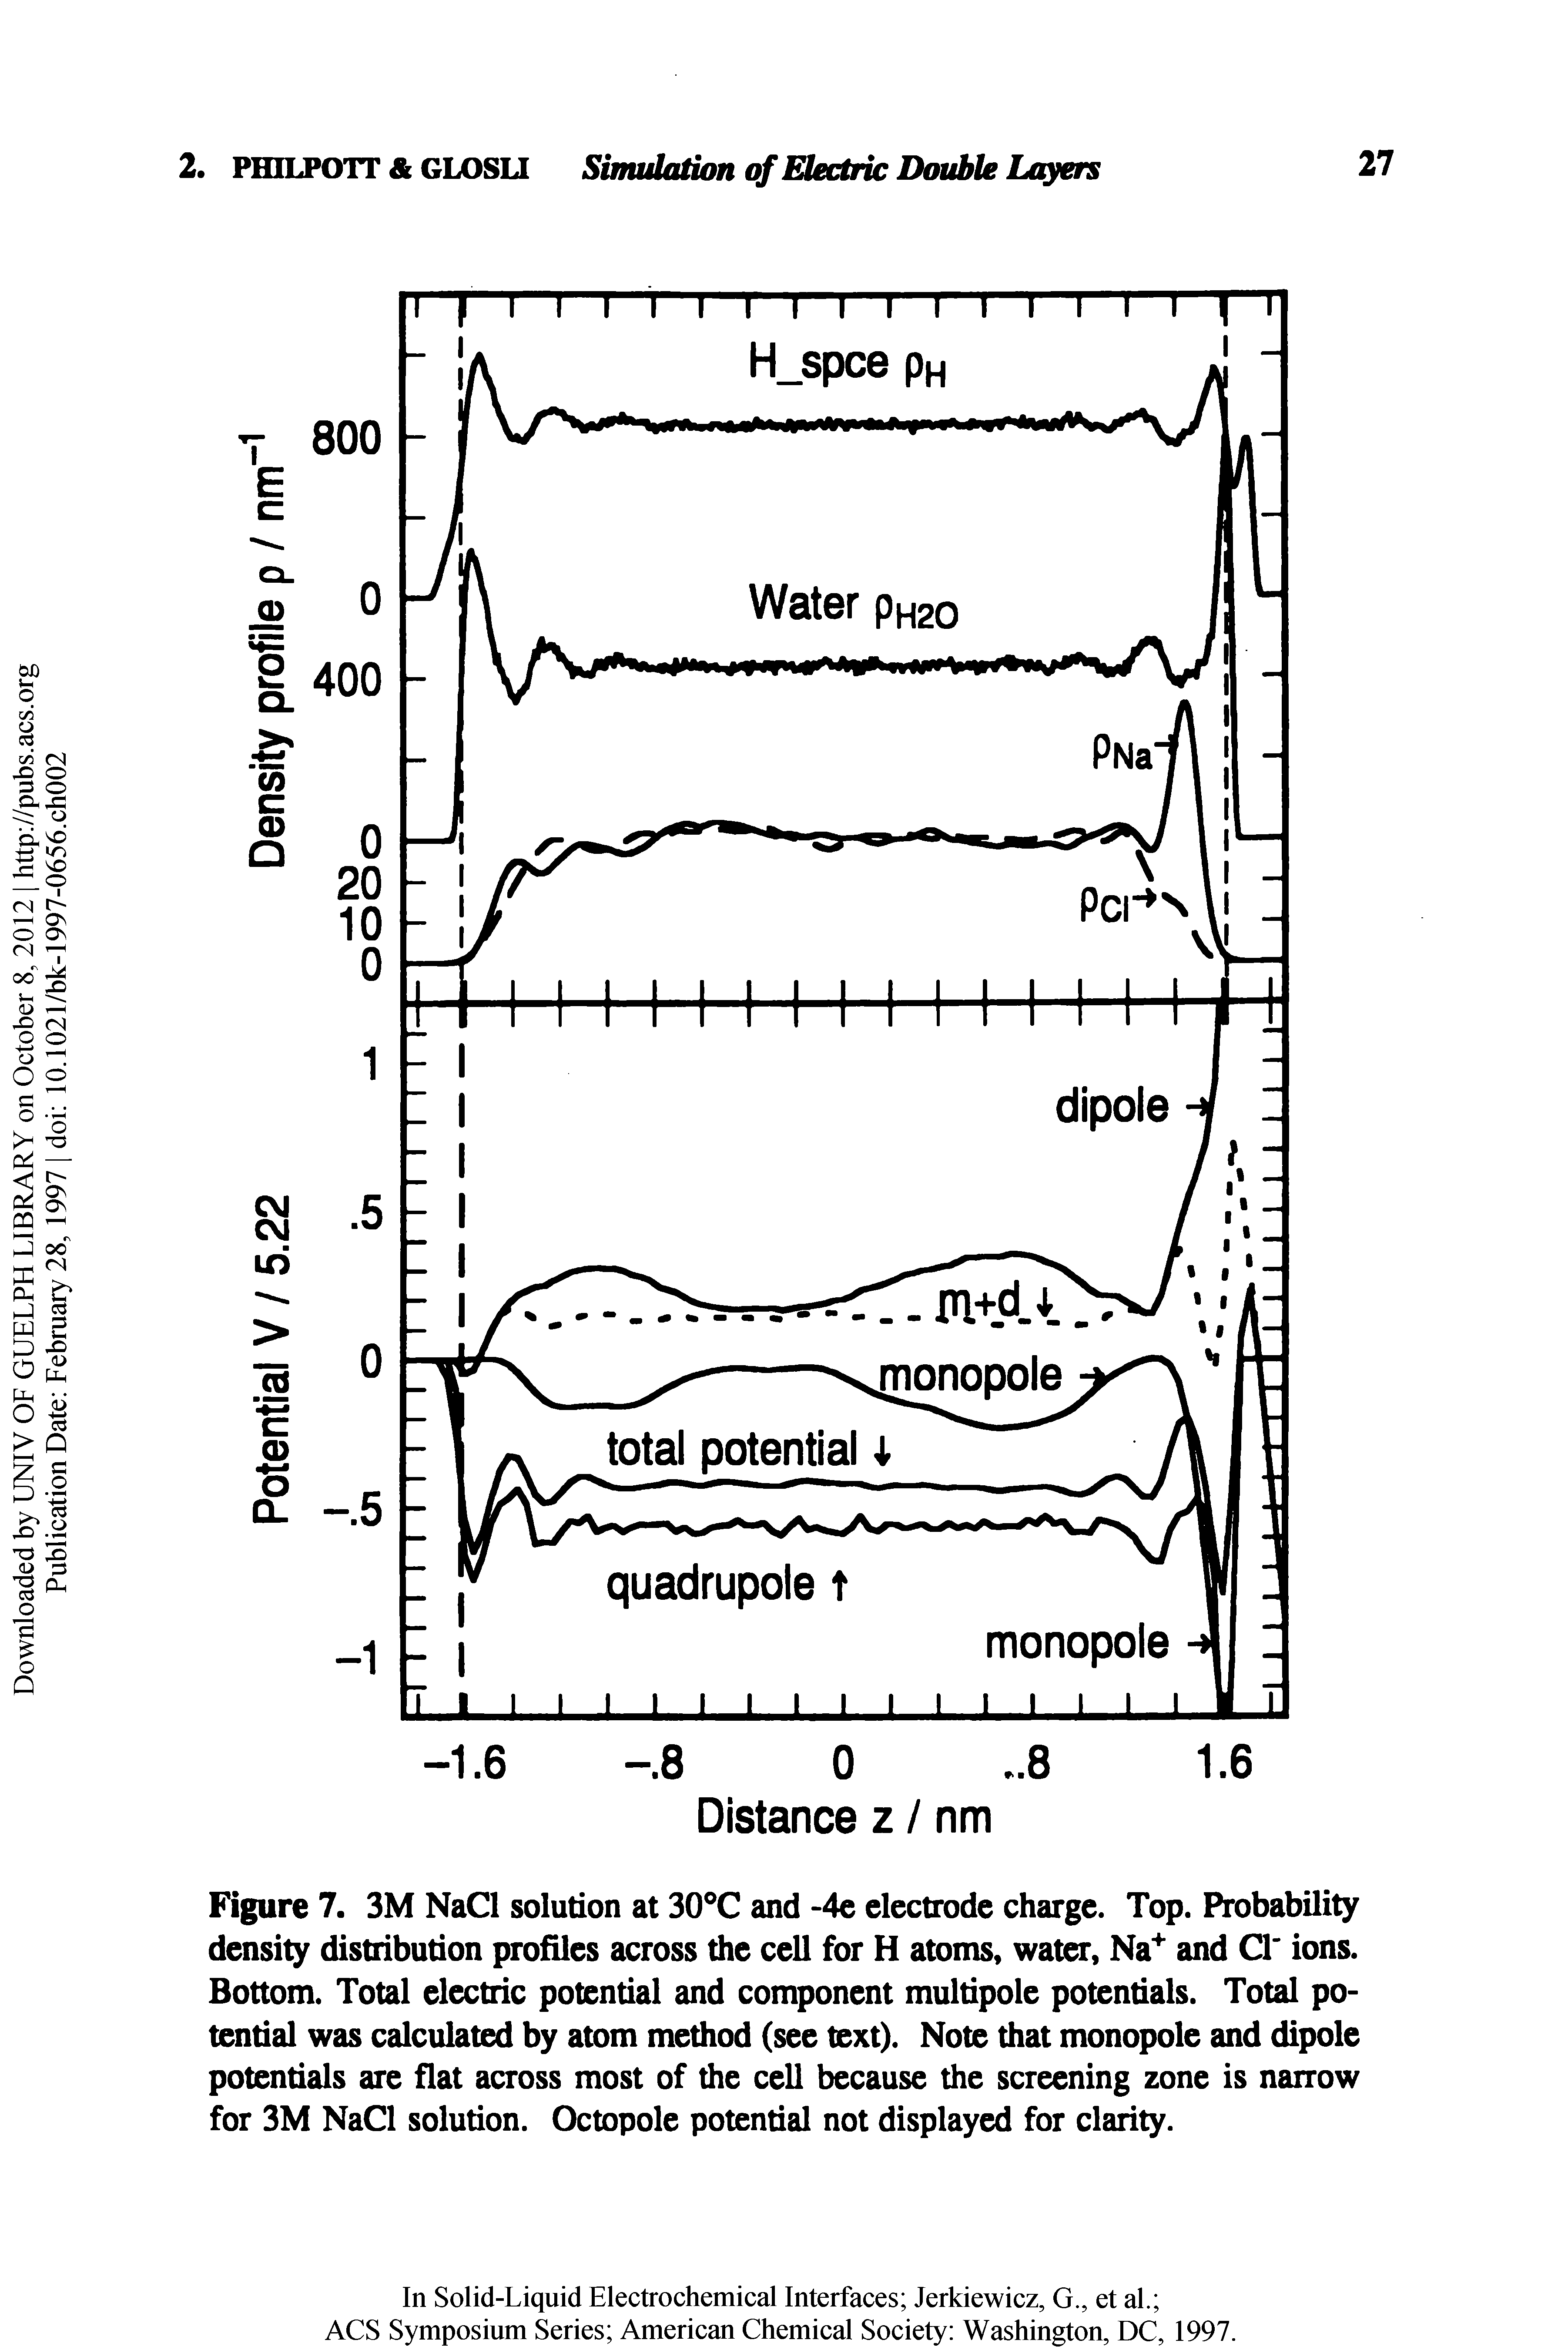 Figure 7. 3M NaCl solution at 30 C and -4c electrode charge. Top. Probability density distribution profiles across the cell for H atoms, water, Na and Cr ions. Bottom. Total electric potential and component multipole potentials. Total potential was calculated by atom method (see text). Note that monopole and dipole potentials are flat across most of the cell because the screening zone is narrow for 3M NaCl solution. Octopole potential not displayed for clarity.